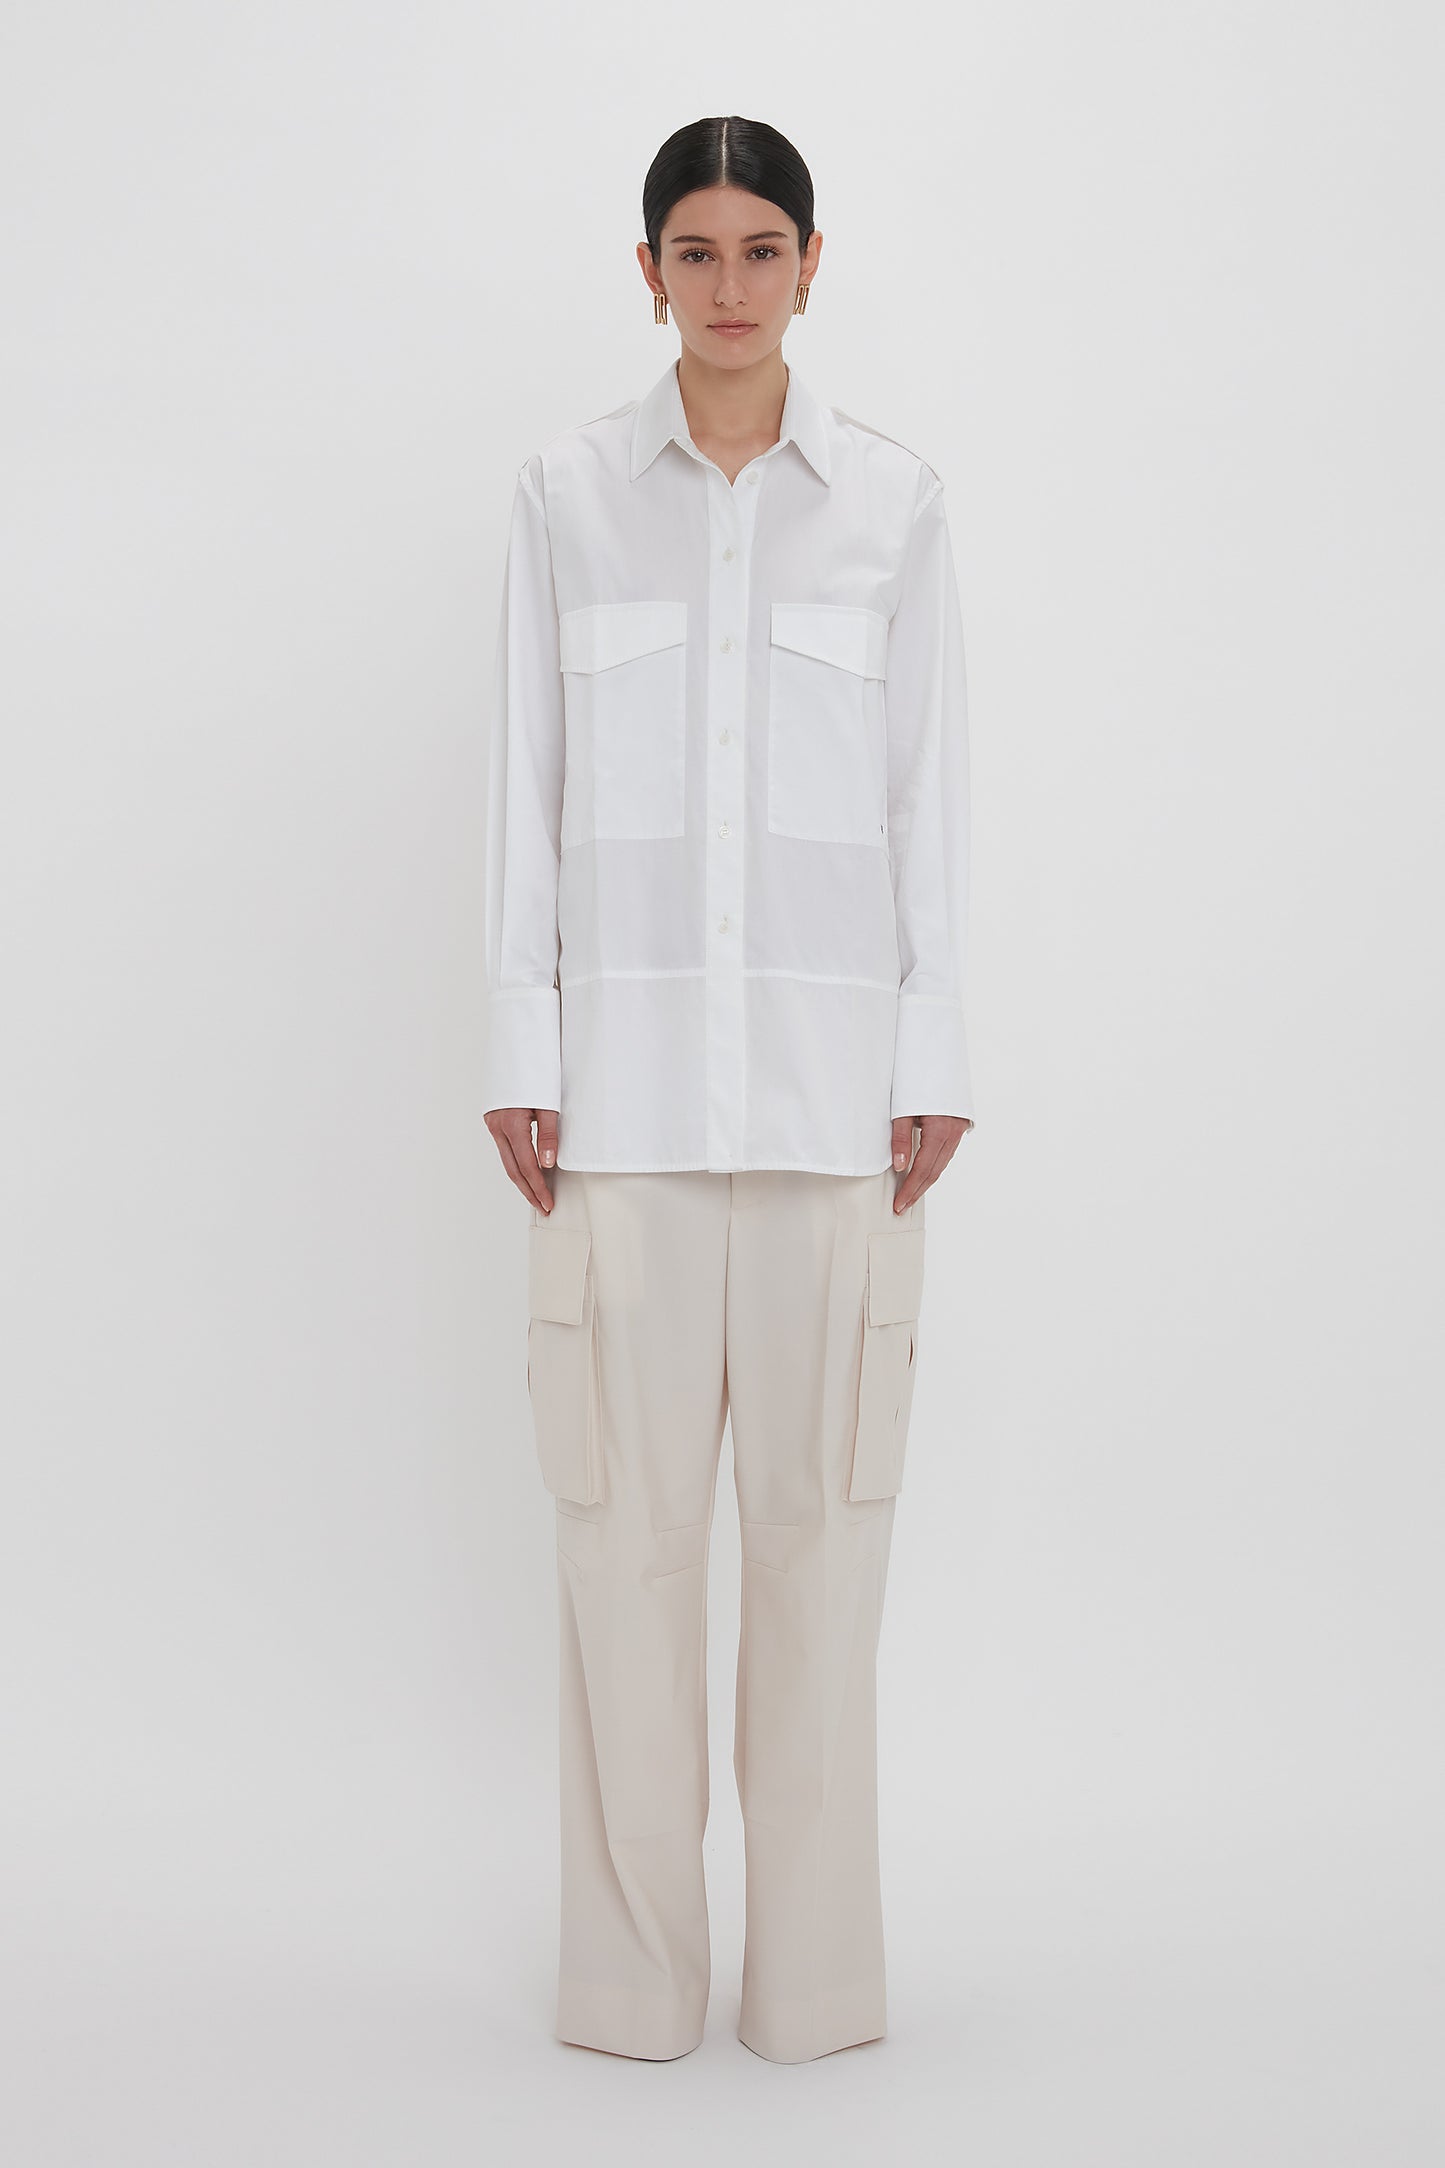 A person stands against a white background wearing an Oversized Pocket Shirt In White by Victoria Beckham made of organic cotton and light beige Relaxed Cargo Trouser.